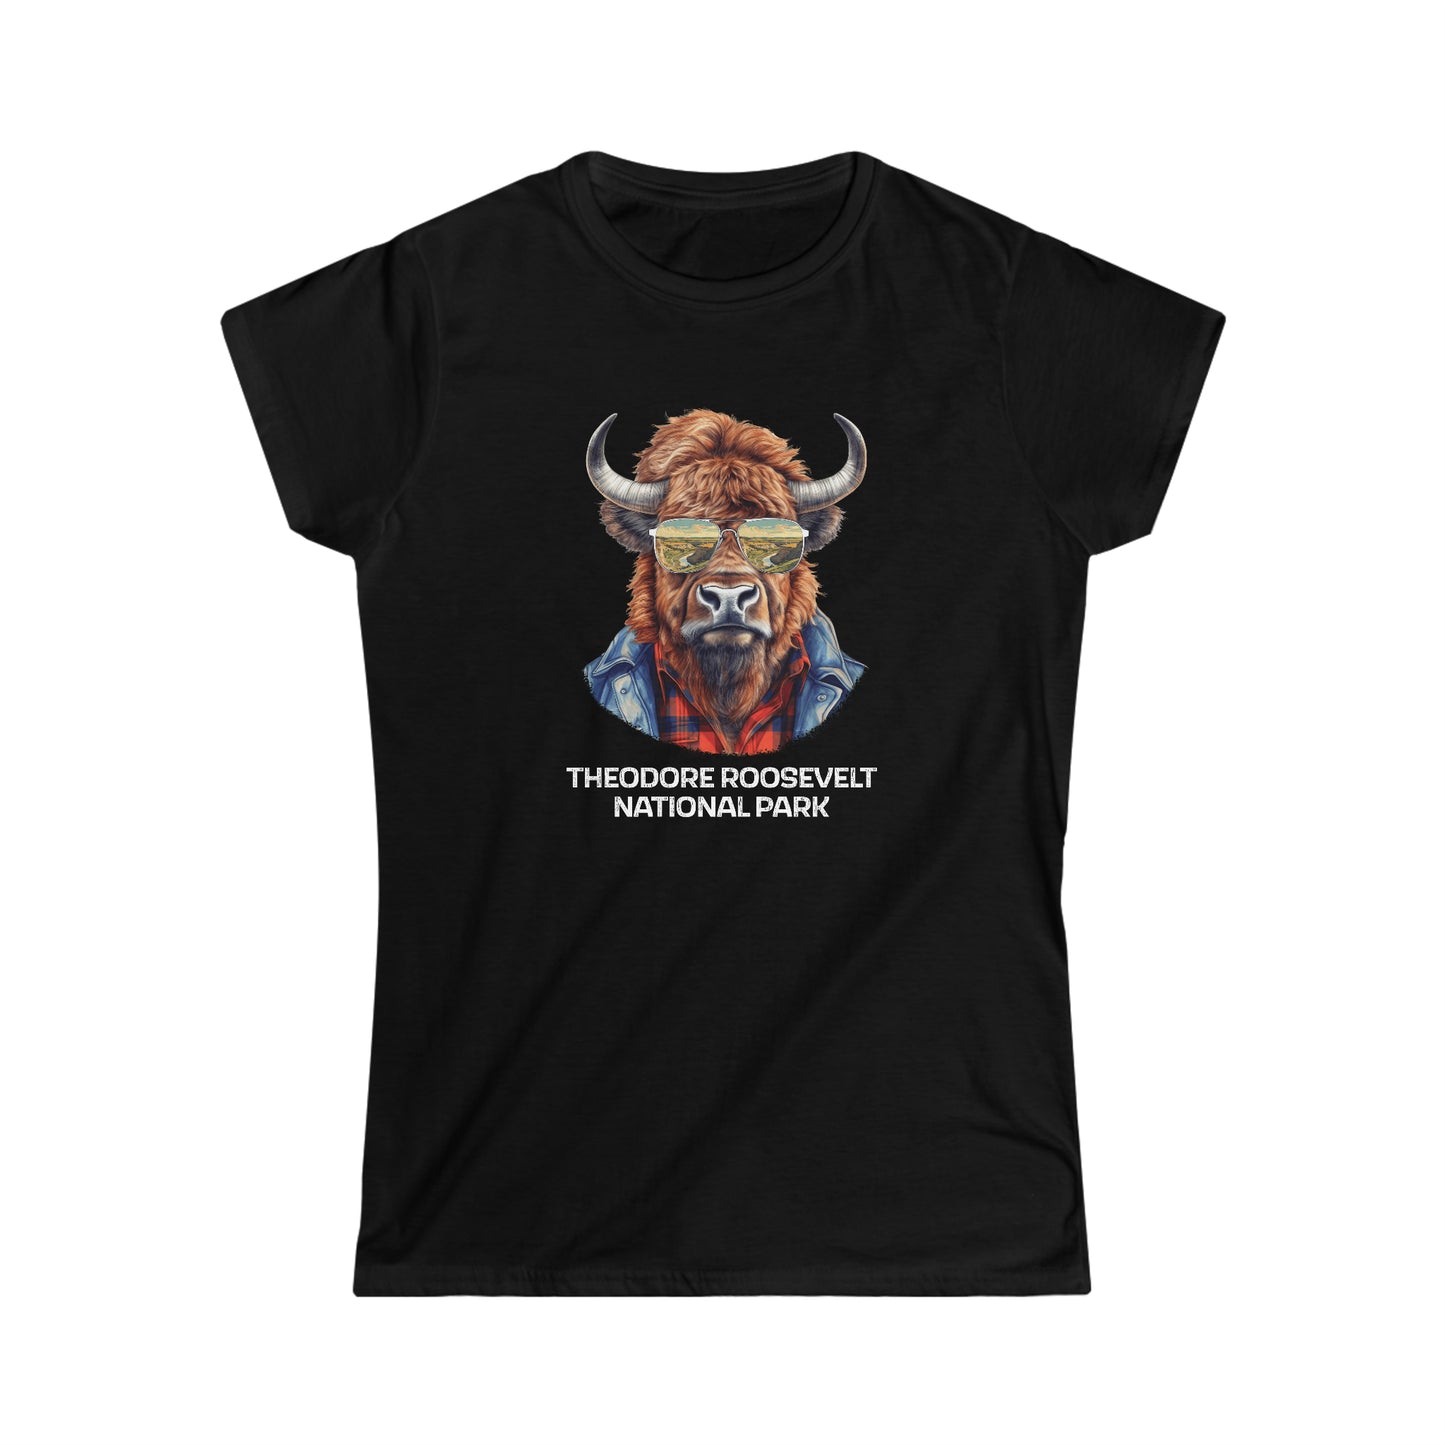 Theodore Roosevelt National Park Women's T-Shirt - Cool Bison